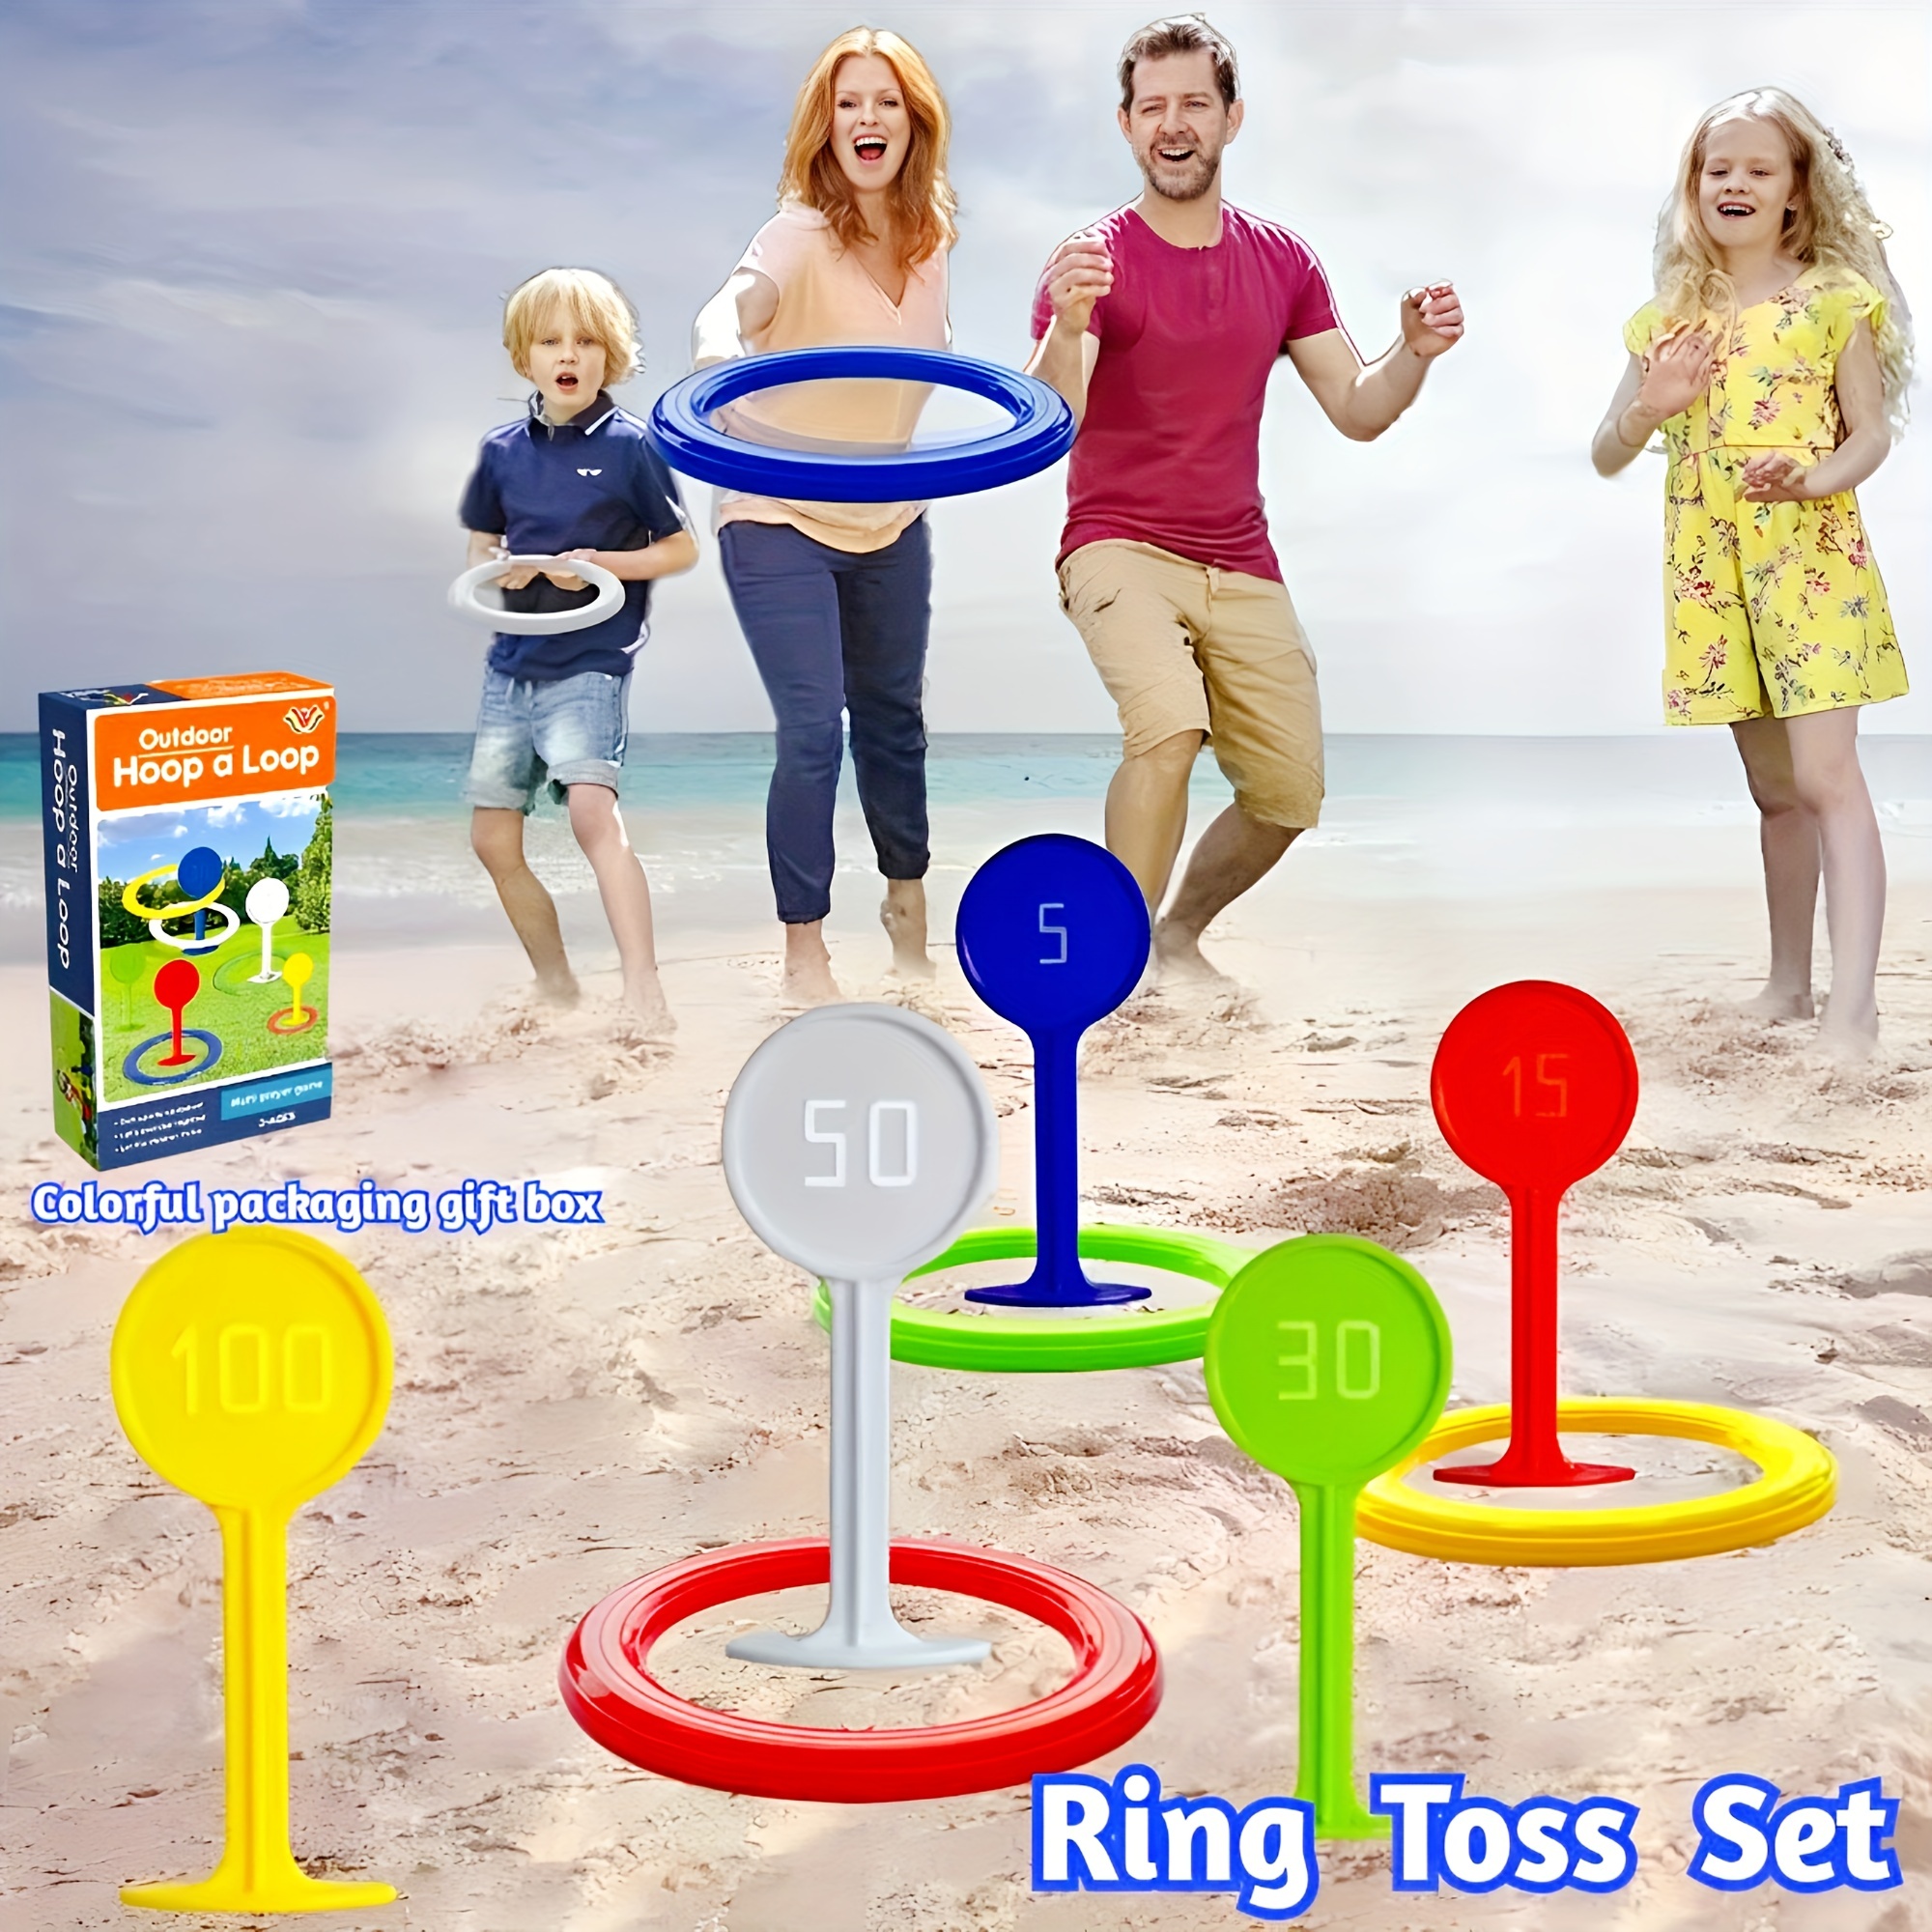  Backyard Golf Target Game, Indoor/Outdoor-Pool Game Floats for  Boys Girls : Toys & Games